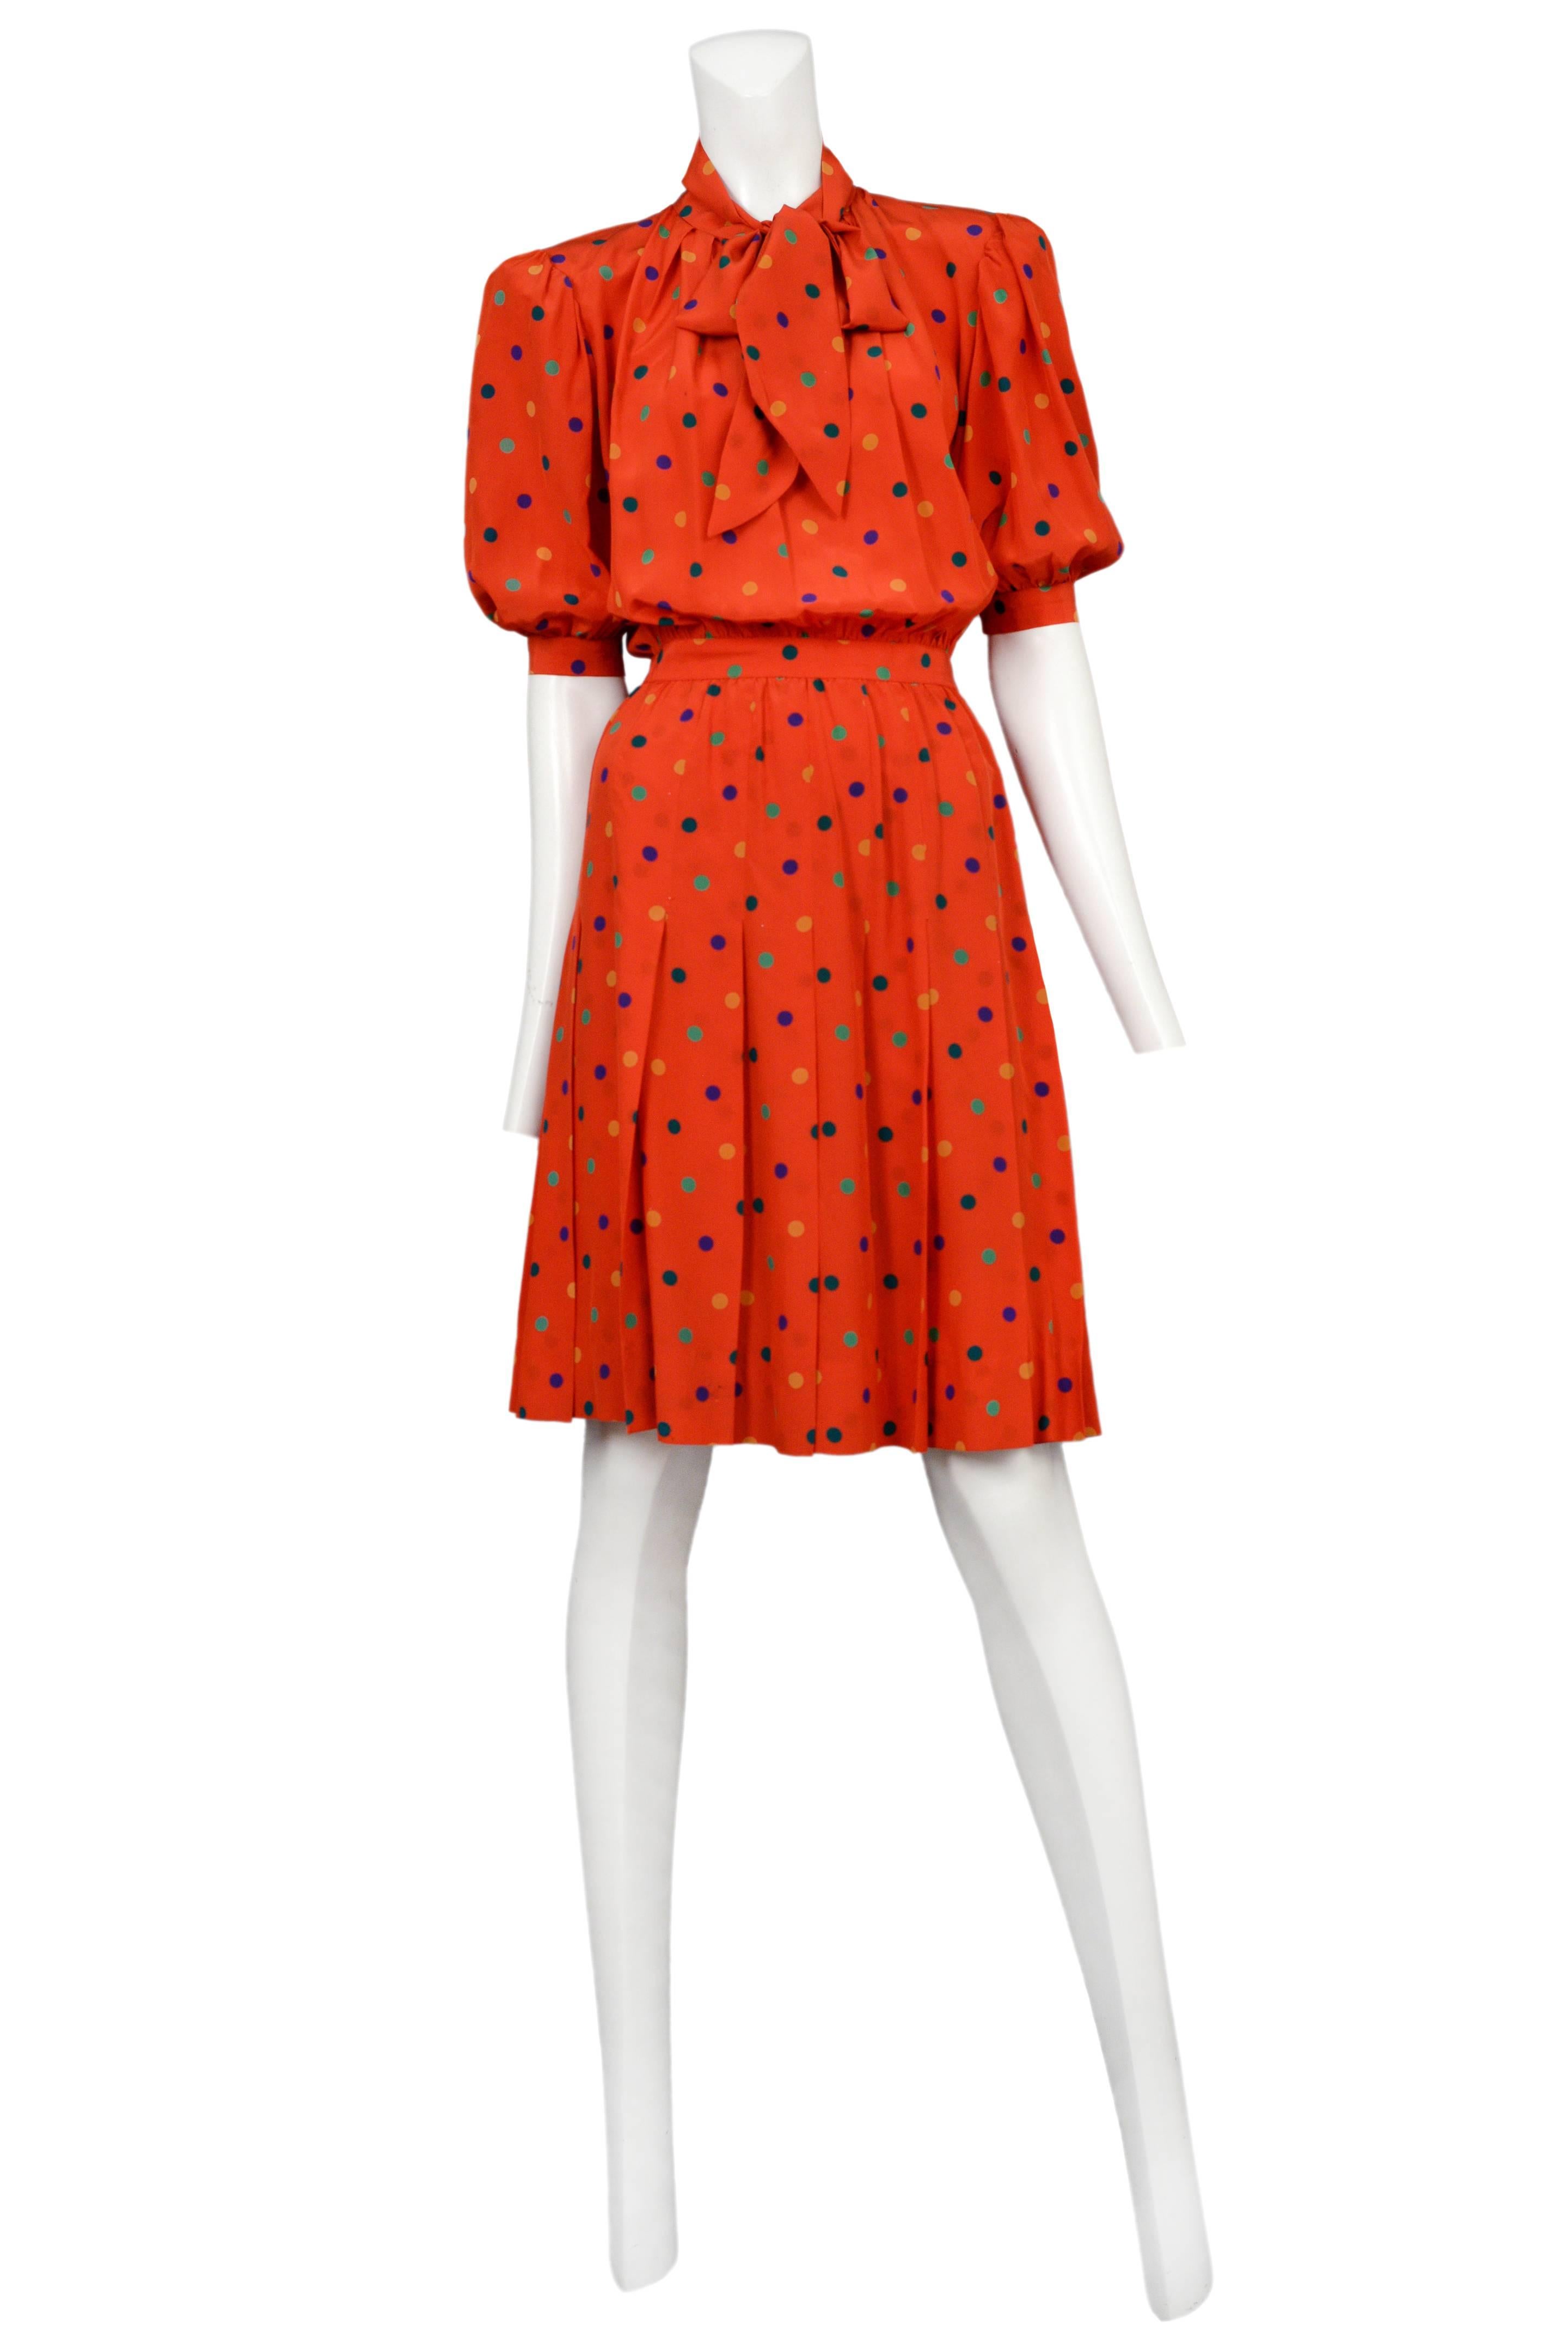 Vintage Yves Saint Laurent red silk knee length day dress featuring pleats at the skirt, a built in waistband, short sleeves, a built in bow at the collar and an allover multicolor polka dot print.
Please inquire for additional images.